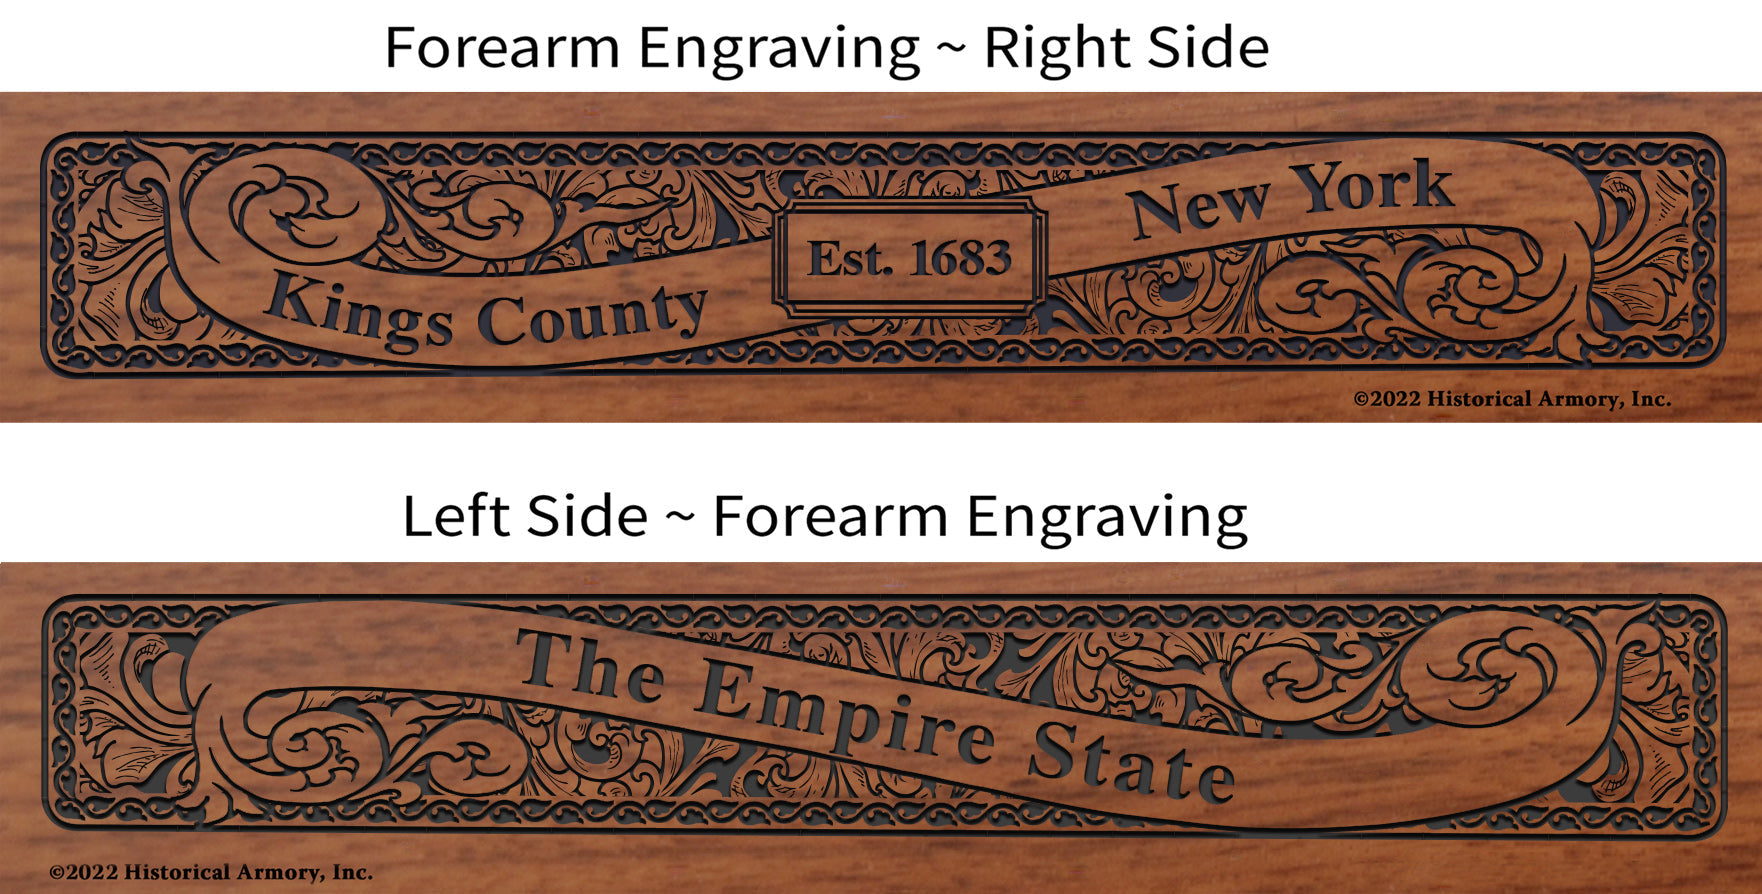 Kings County New York Engraved Rifle Forearm